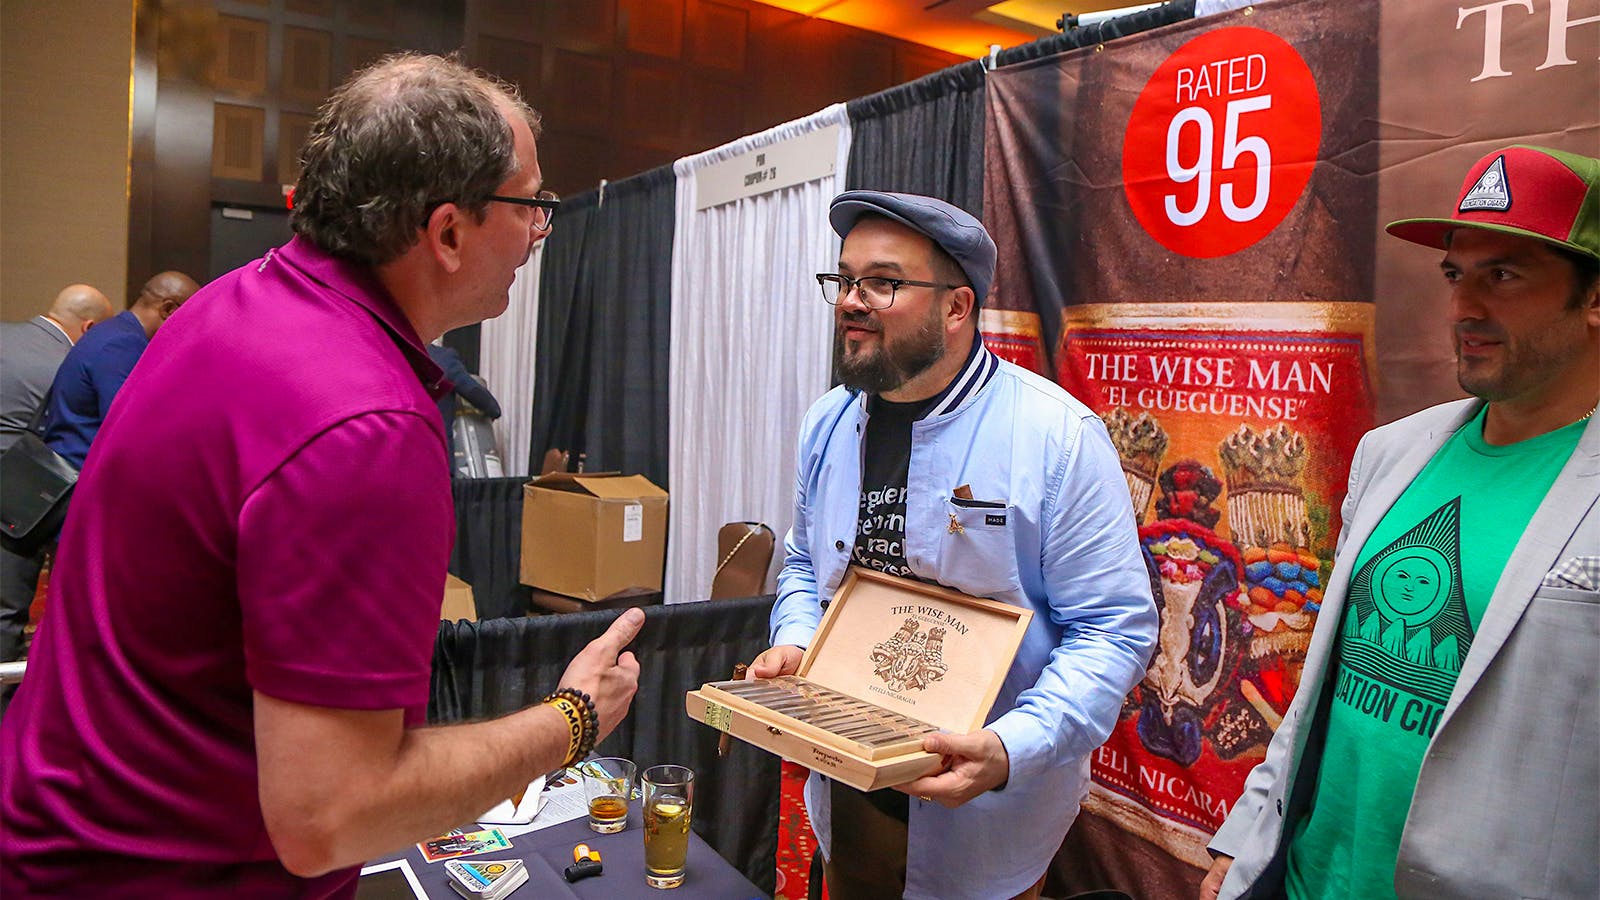 Foundation Cigars owner Nick Melillo talks with a guest at his booth.